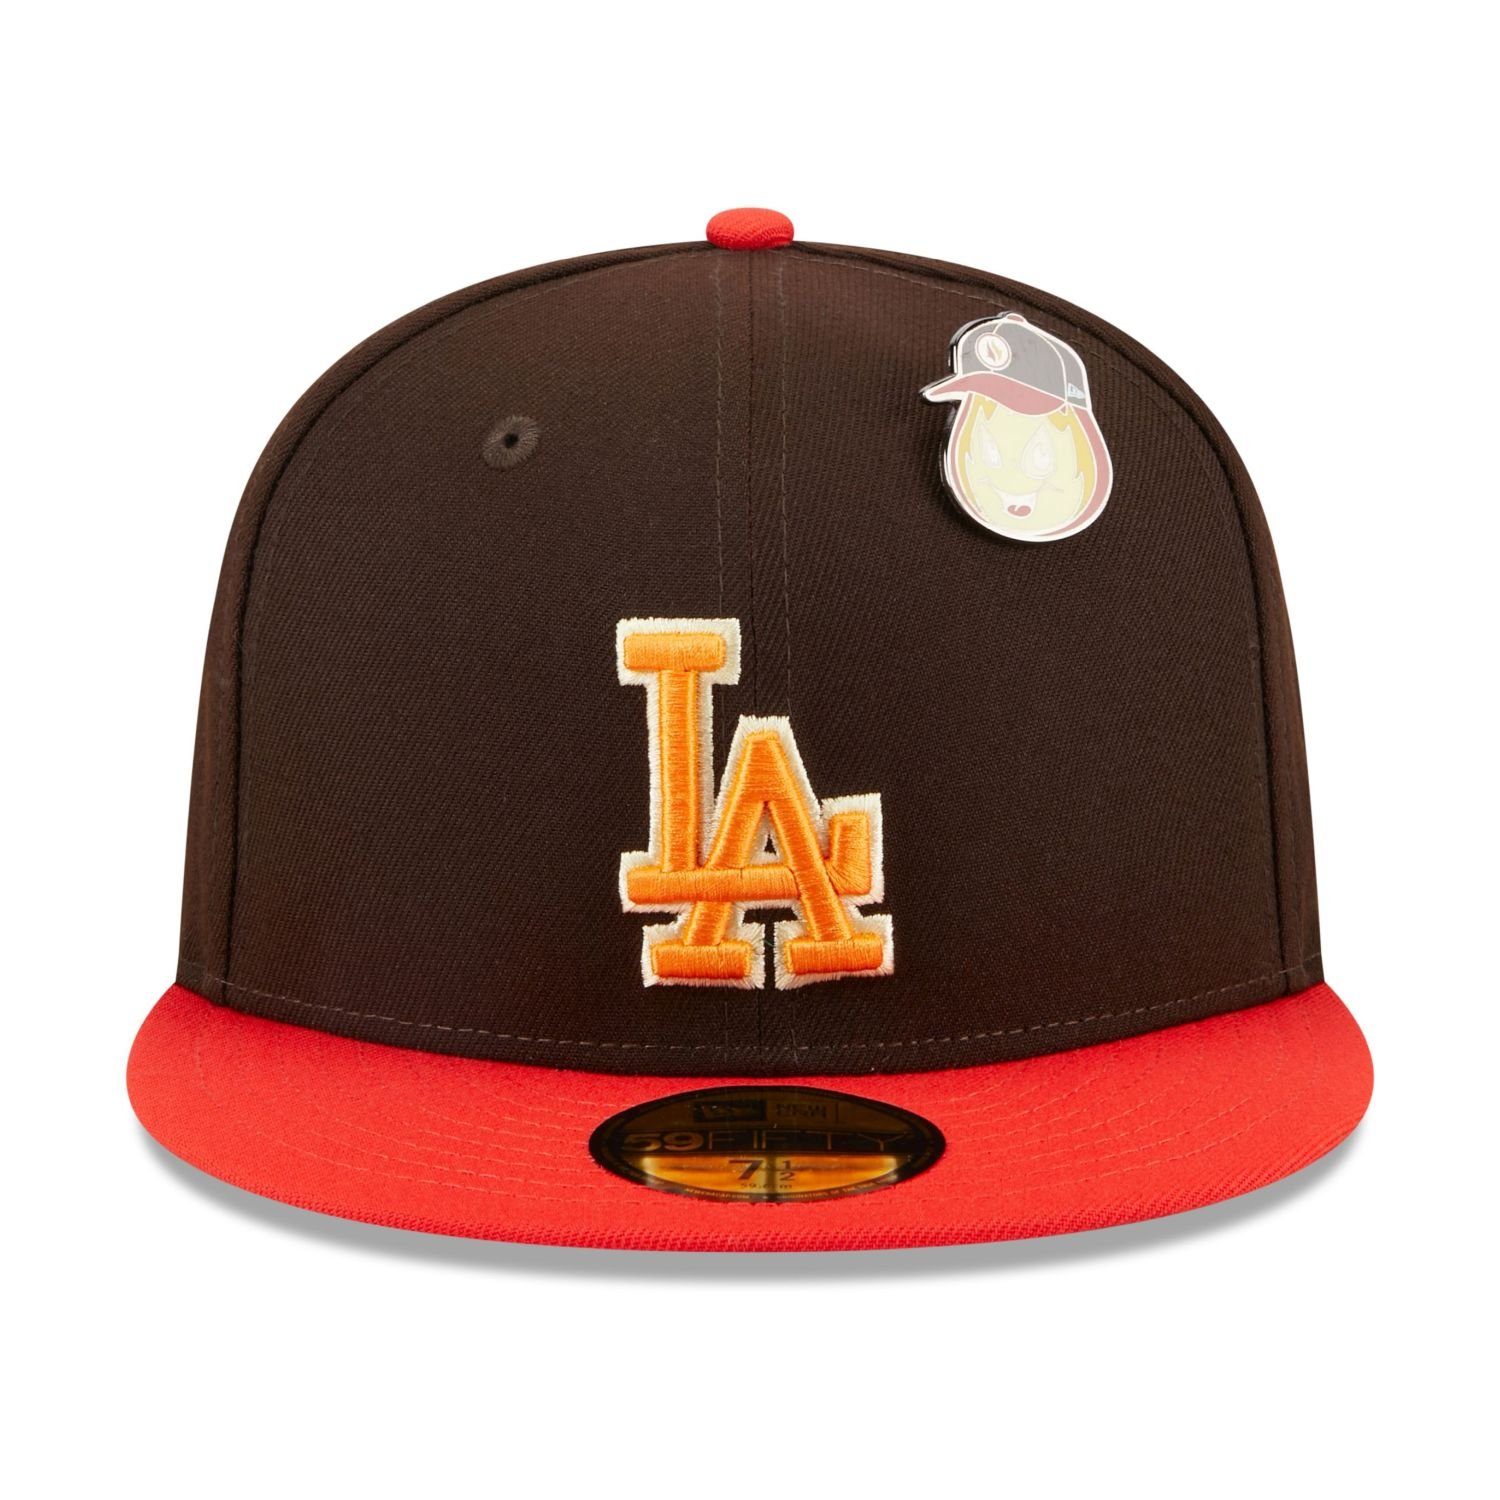 New Era 59Fifty PIN Cap Fitted ELEMENTS Los Angeles Dodgers